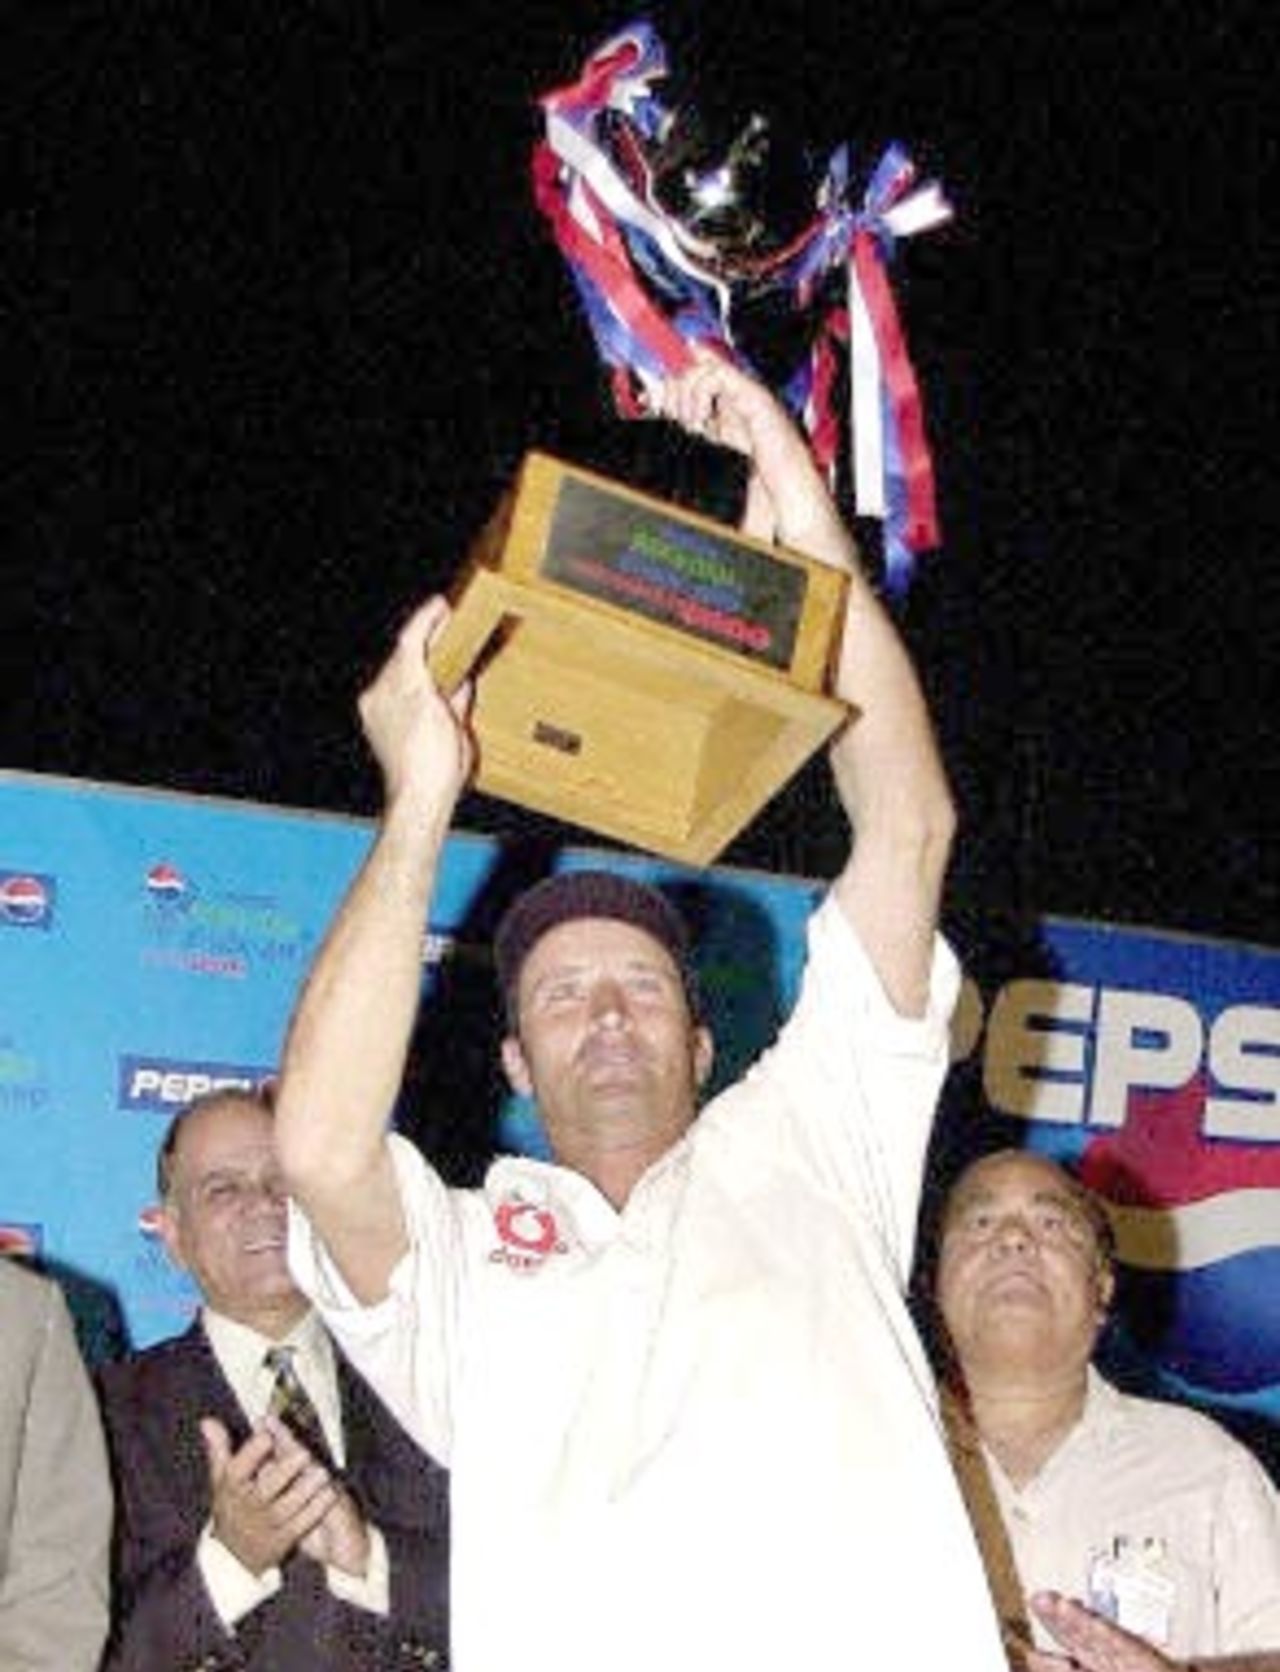 English captain Nasser Hussain holds aloft the trophy of the Test series after winning against Pakistan by six wickets on the last day of the third cricket Test match at the National Stadium in Karachi, 11 December 2000. England clinched a historic series victory, snatching a stunning win with just minutes to spare in the third and final Test. England's six-wicket triumph makes them the first English side to win a Test in Pakistan since 1962 and end the hosts' unbeaten record in 34 encounters.